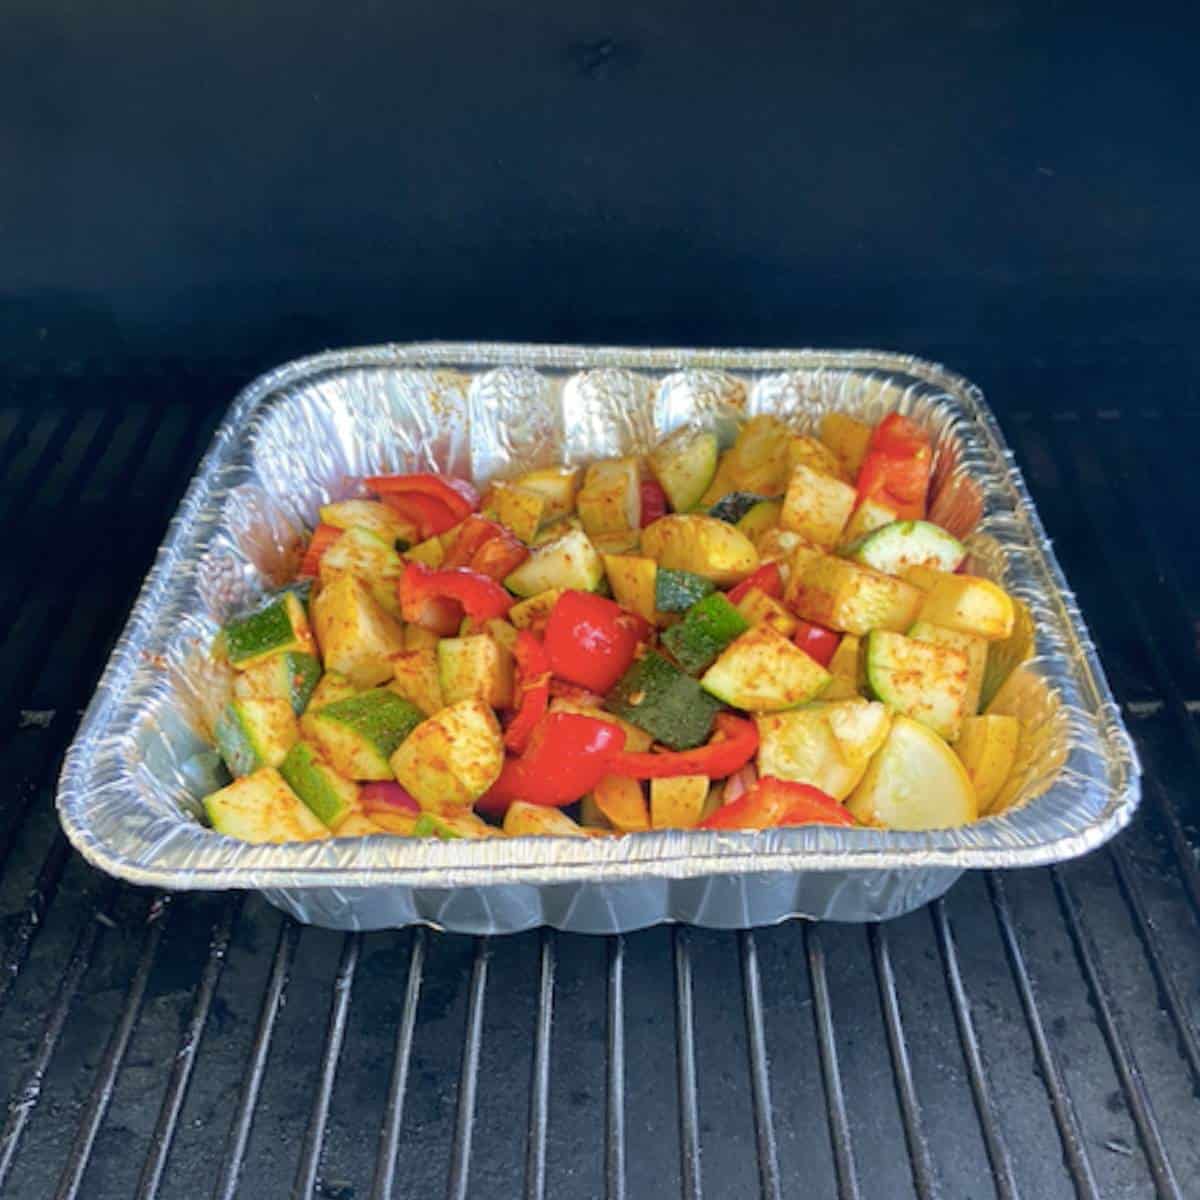 Vegetable tray in smoker.